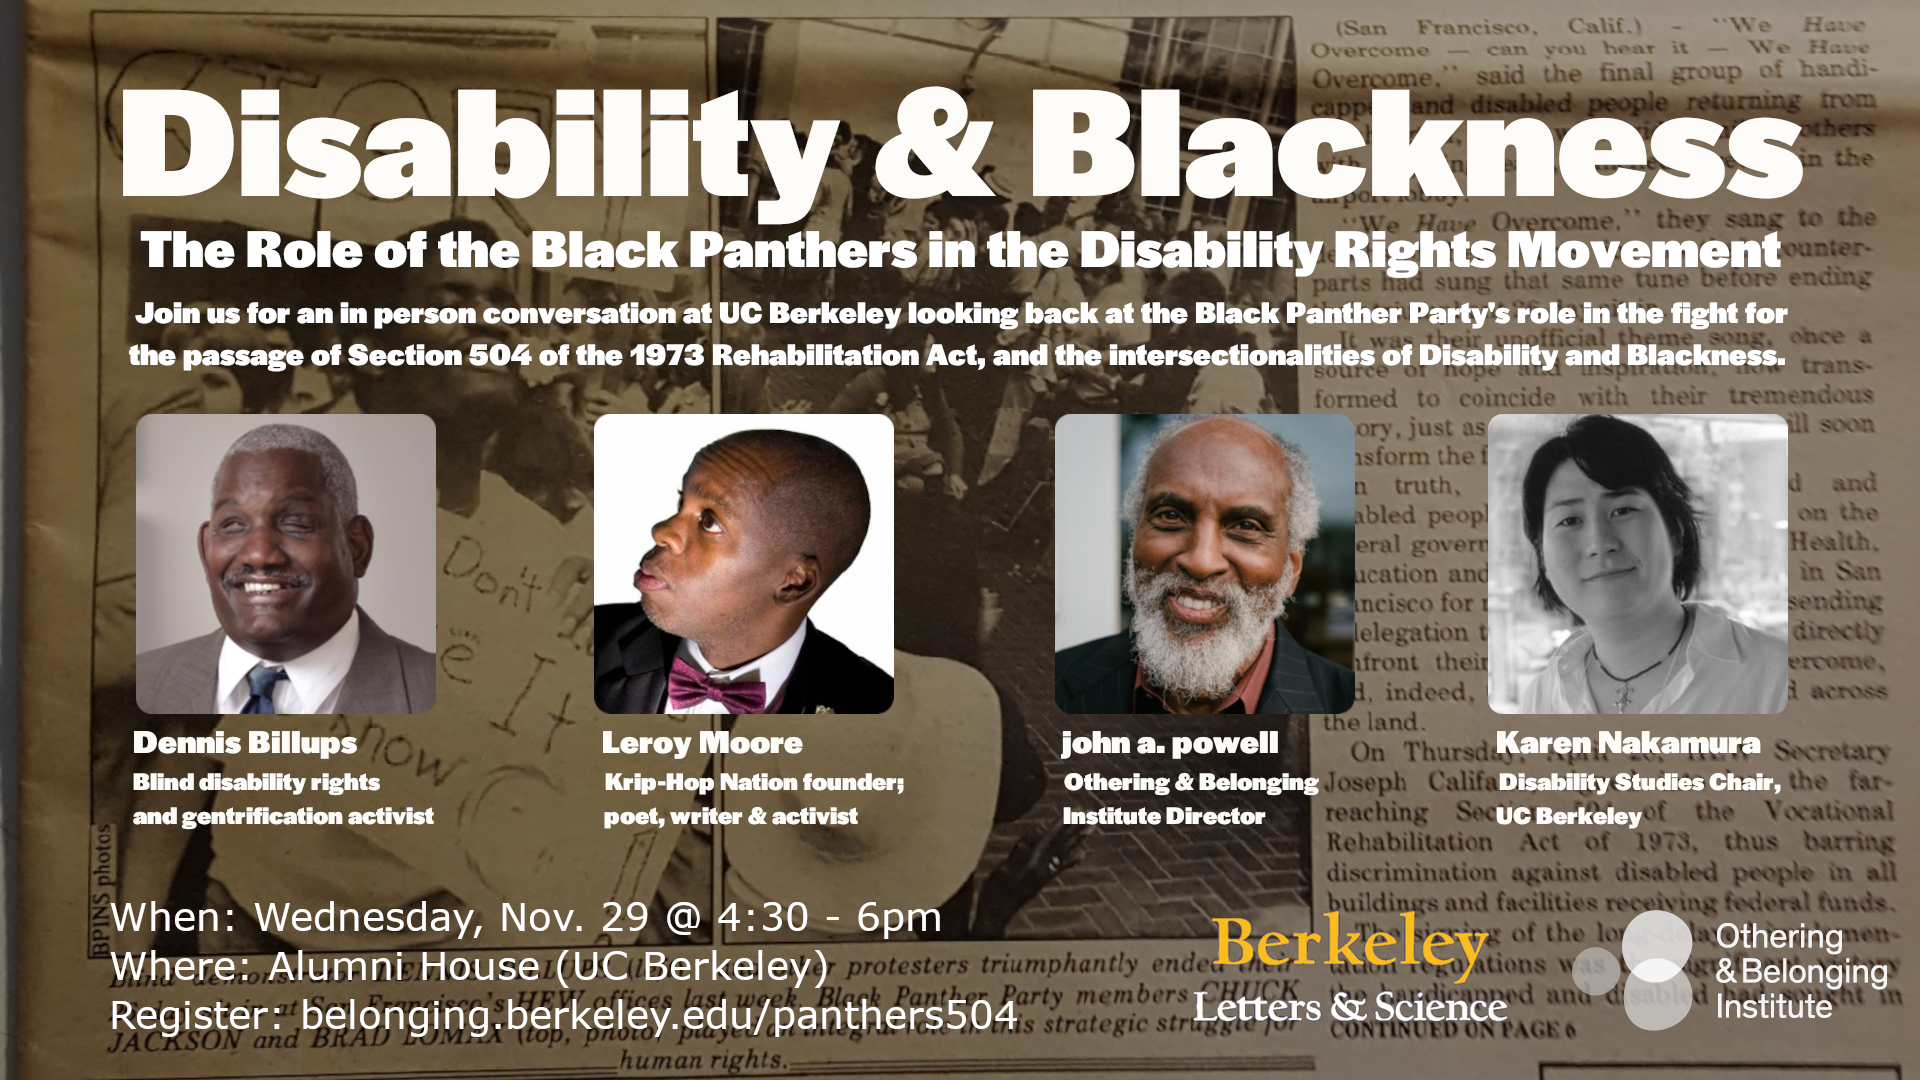 Disability & Blackness: The Role of the Black Panthers in the Disability Rights Movement